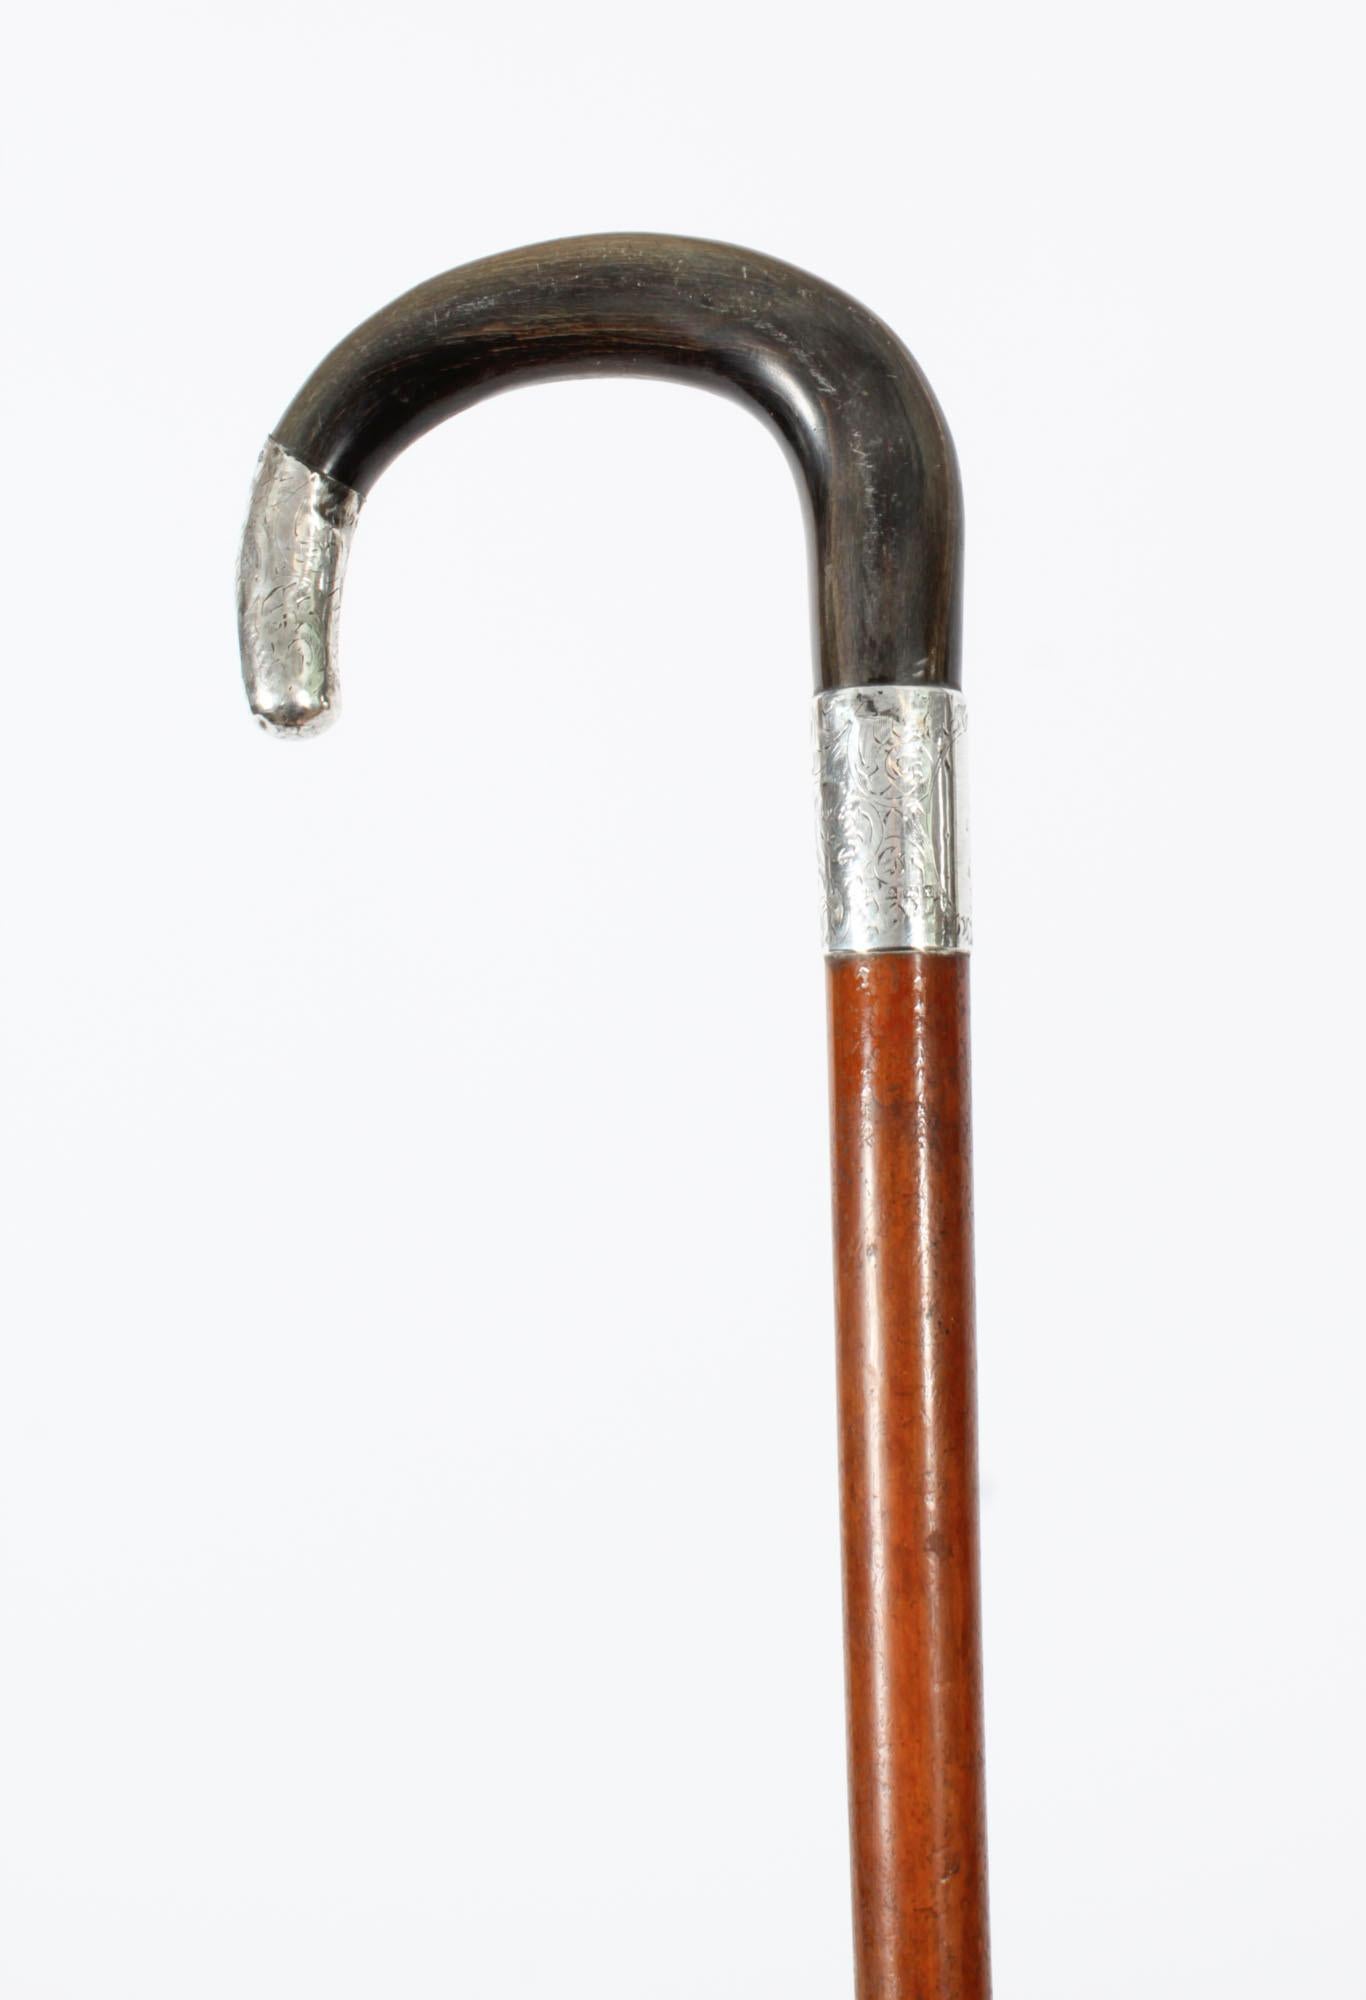 This is a beautiful antique Victorian Rhinoceros horn handled walking stick, bearing hallmarks for Birmingham 1893 and the makers mark JH.
 
The handle is carved in a Shepherds crook shape and features an elegant  silver collar and tip with a 